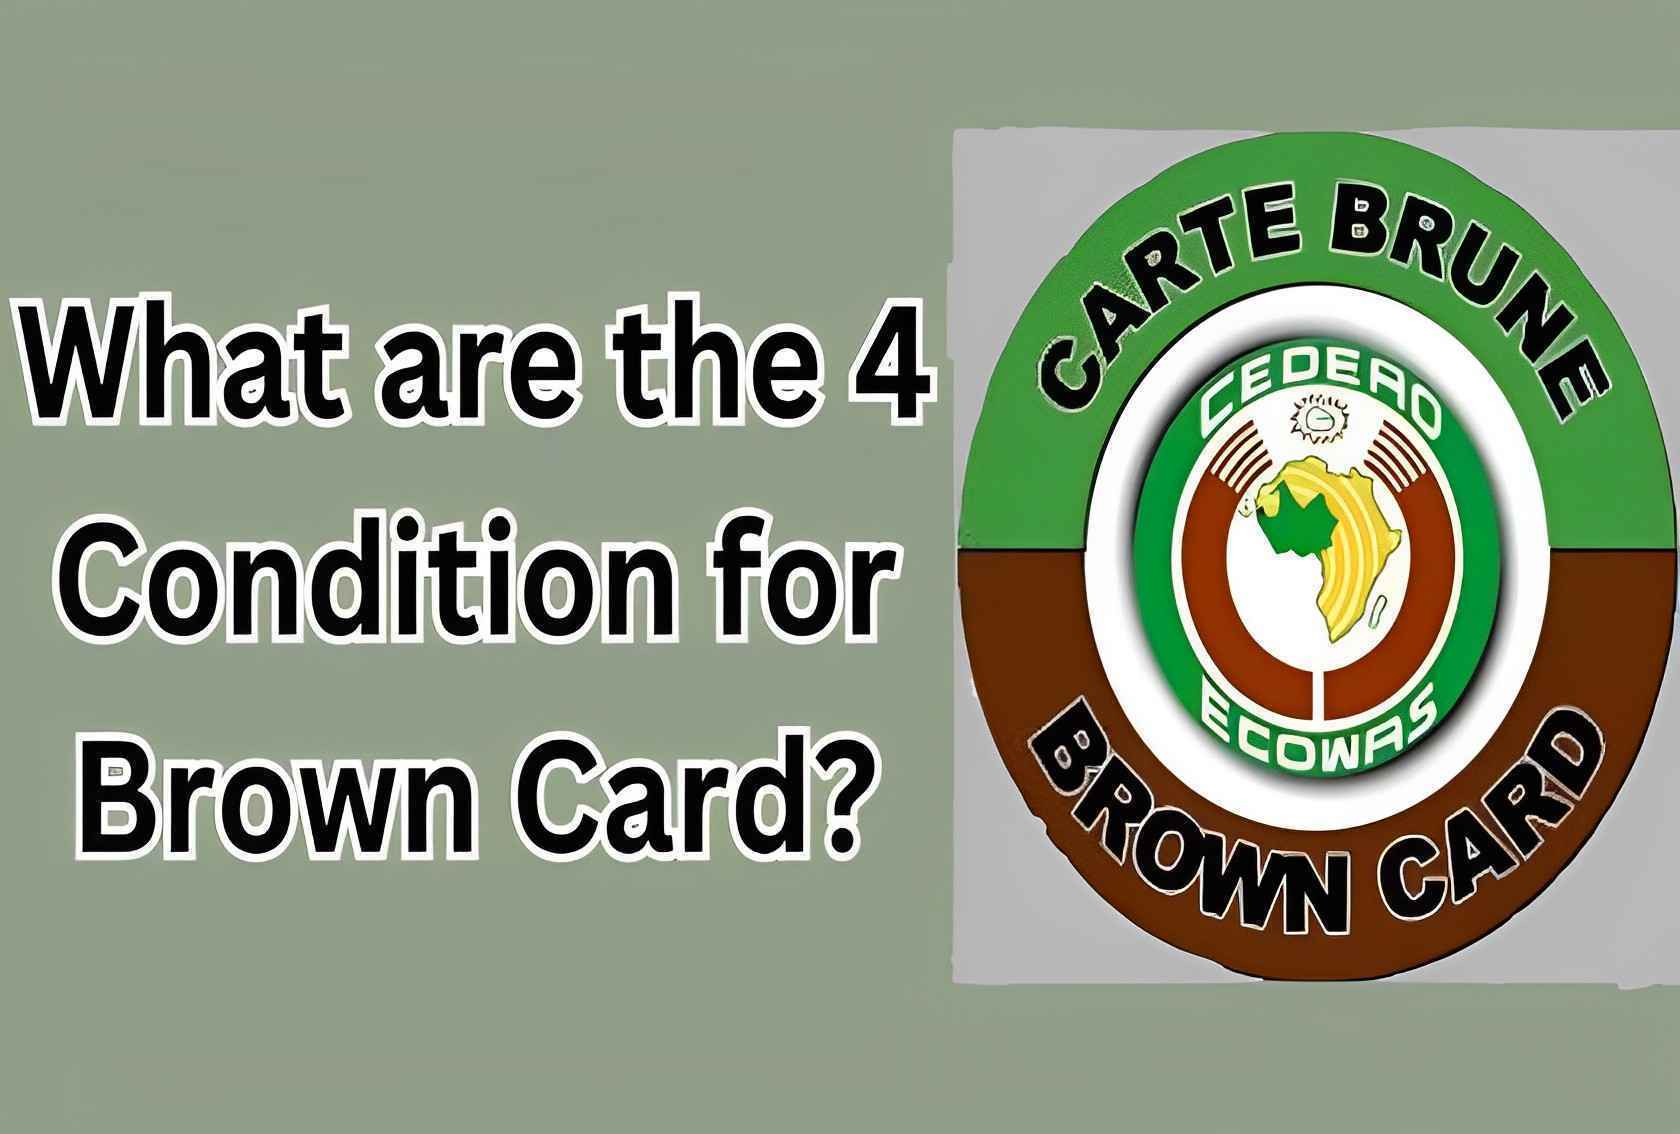 What are the 4 Condition for Brown Card? - PiggyBank